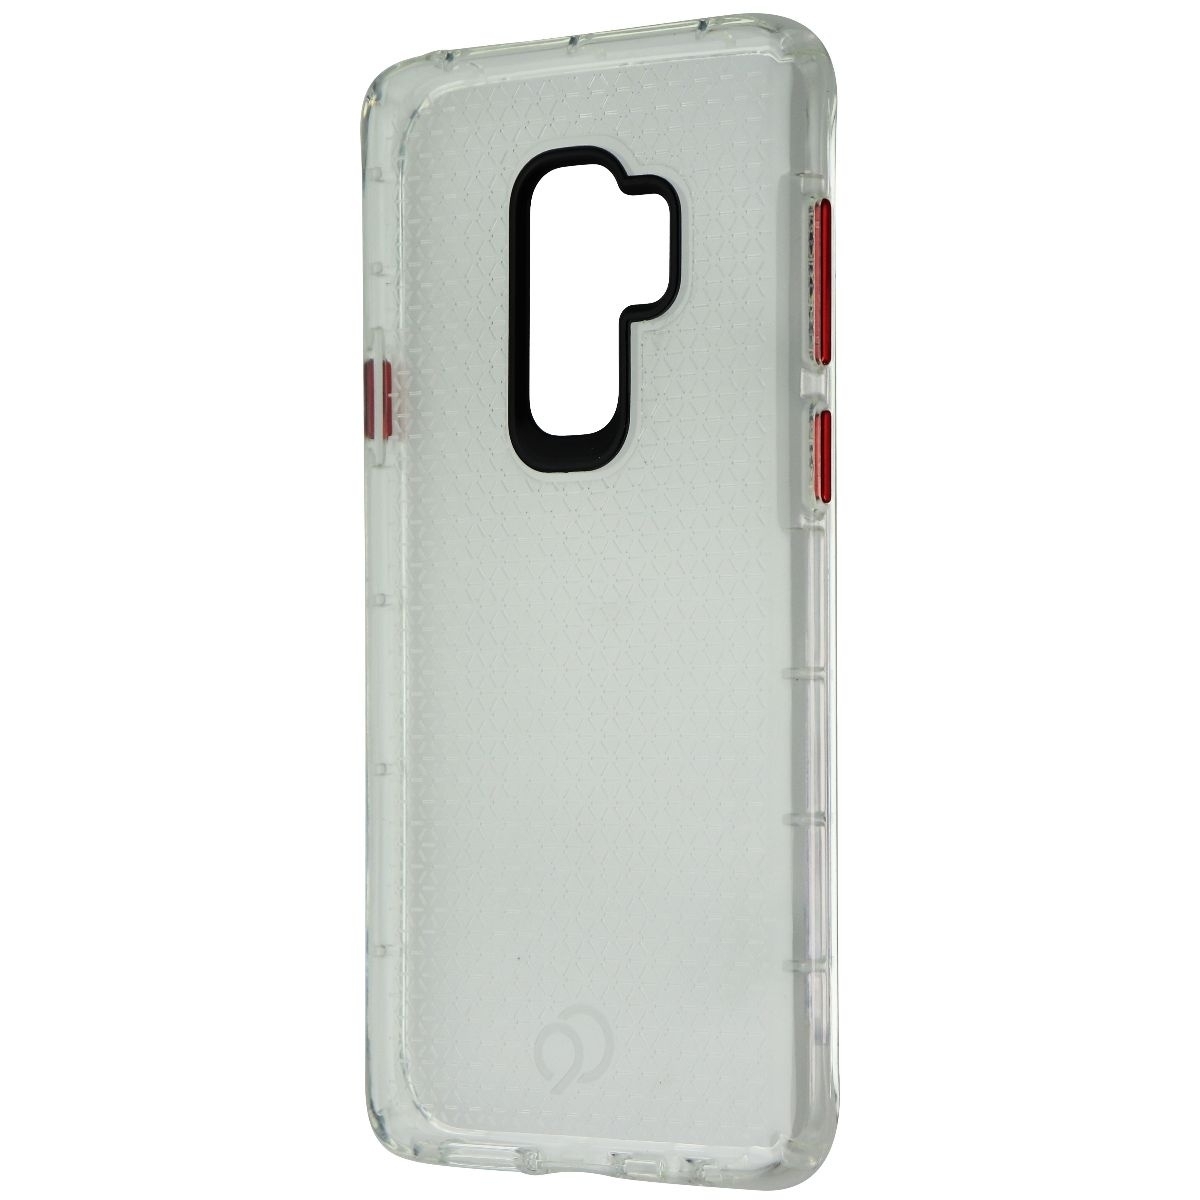 Nimbus9 Phantom 2 Gel Case For Samsung Galaxy (S9+) - Clear (Red Buttons)